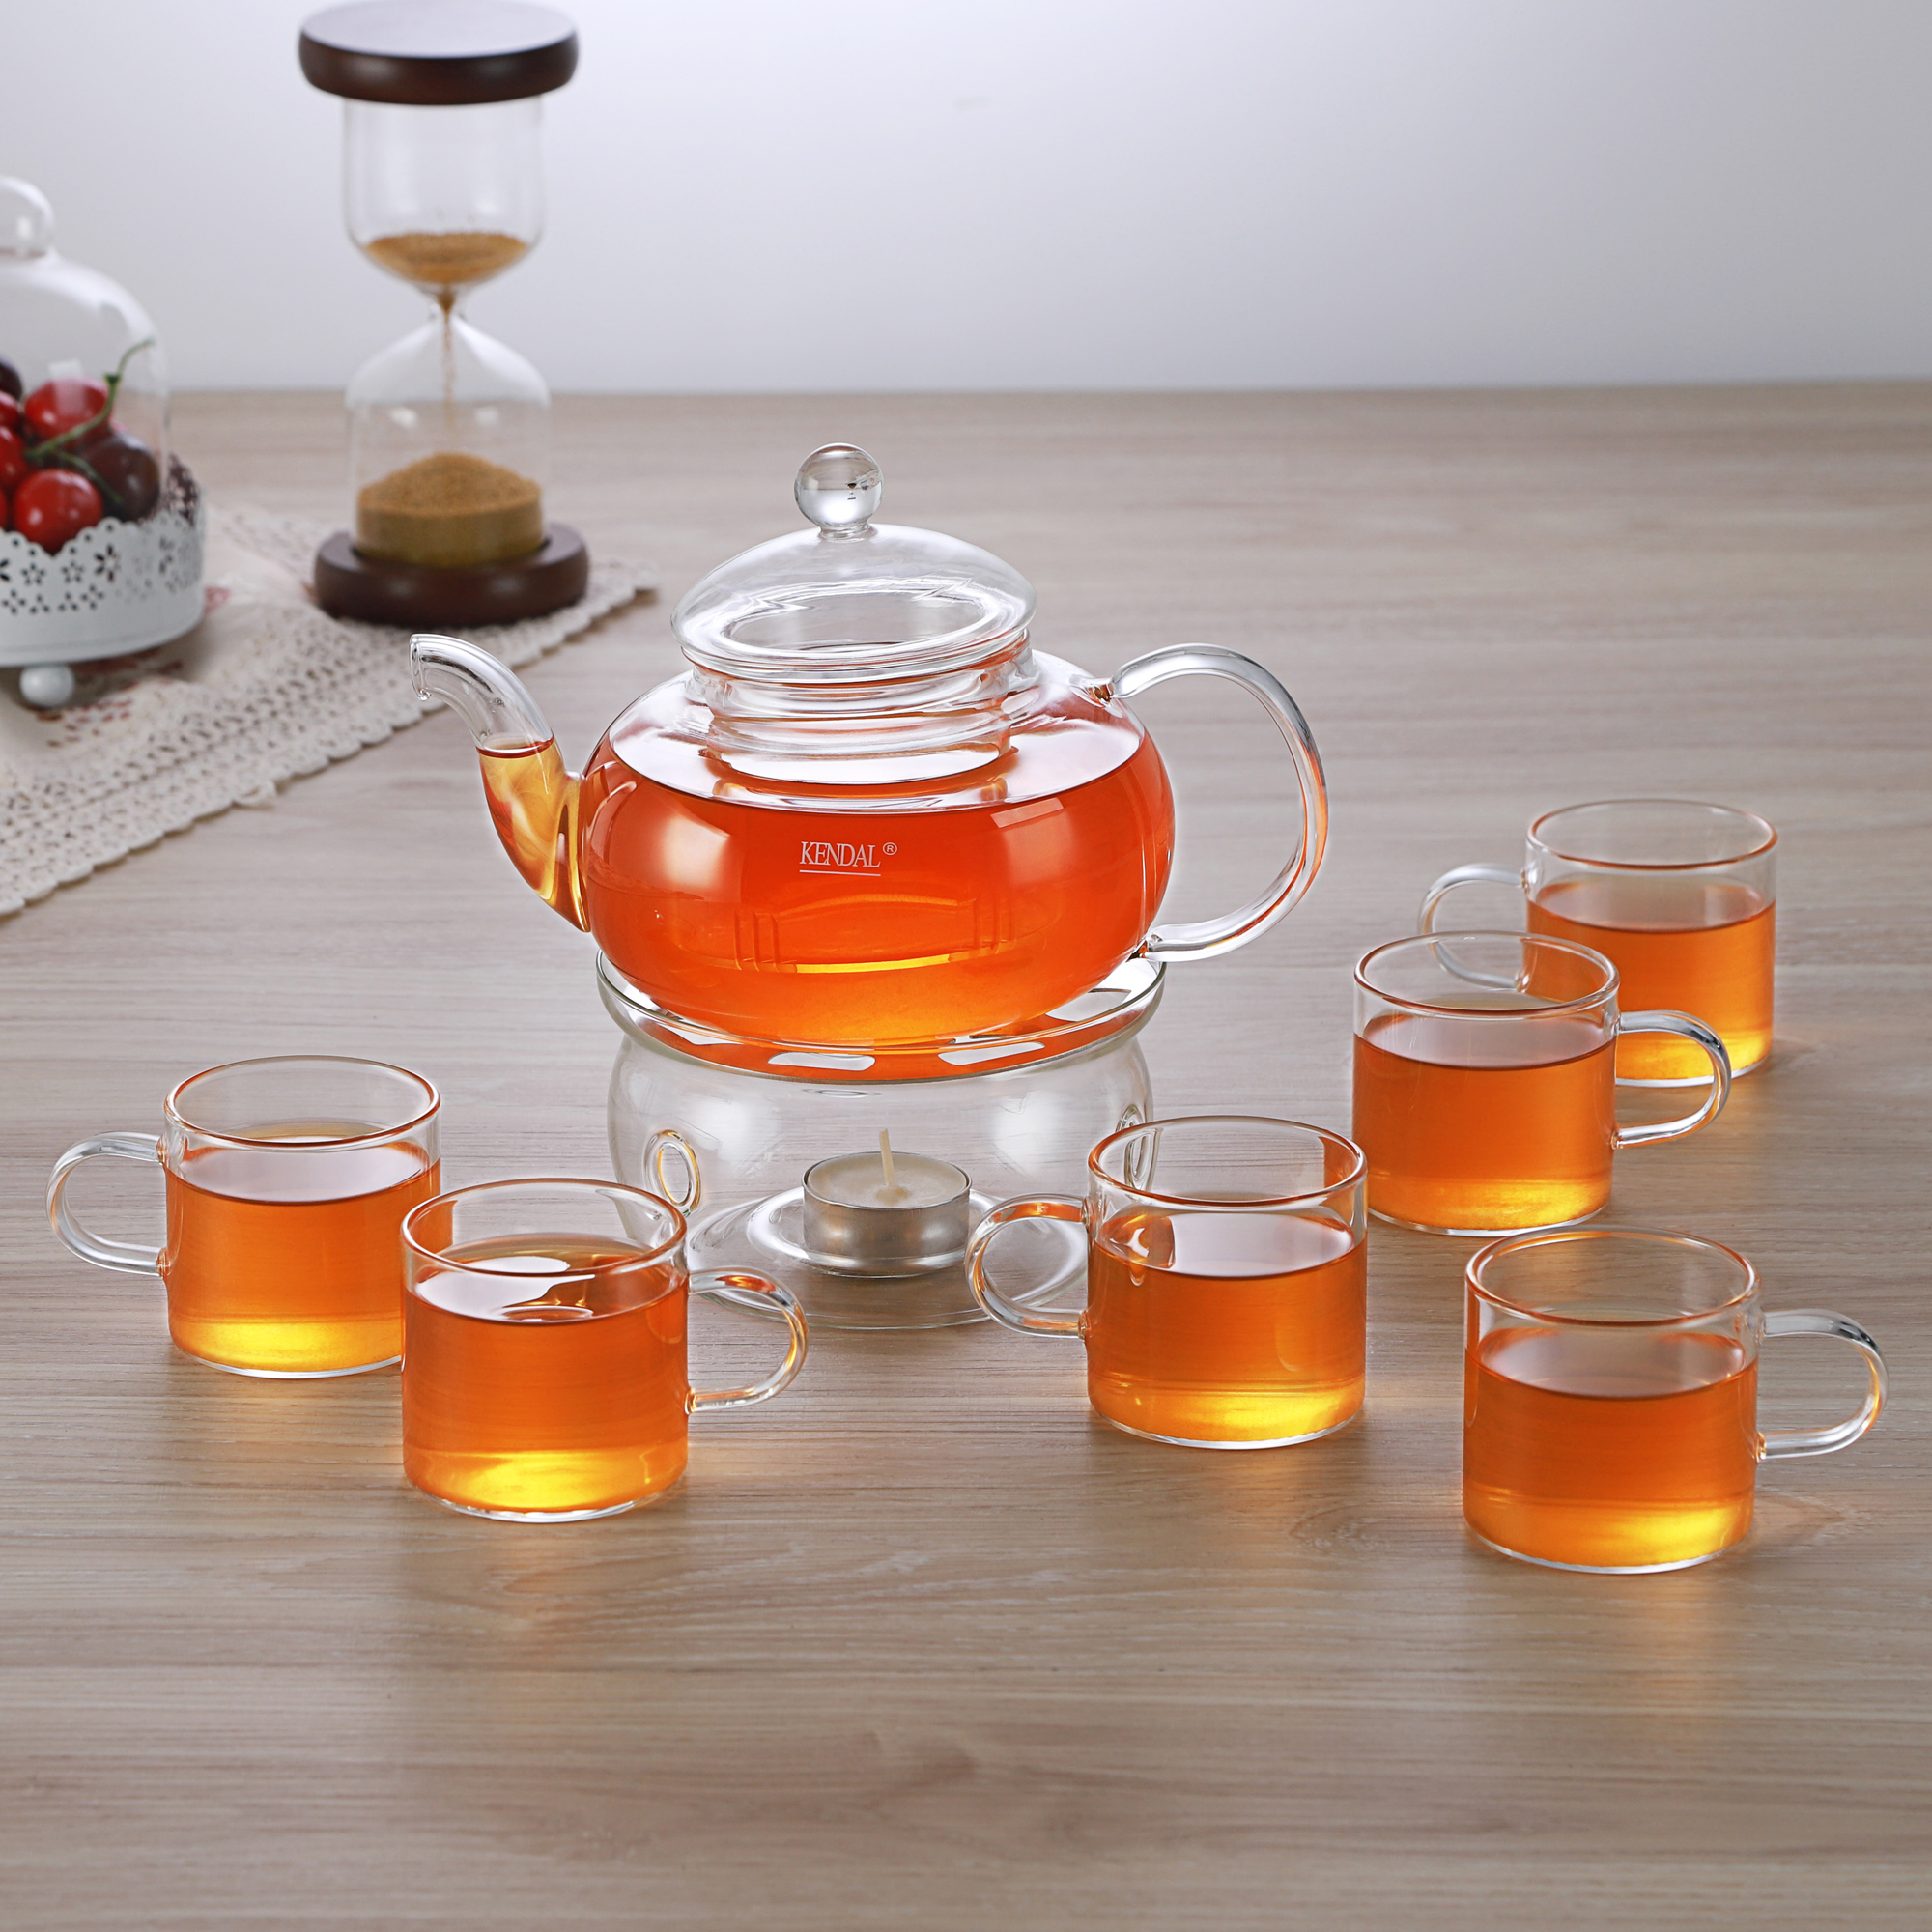 27 oz glass filtering tea maker teapot with a warmer and 6 tea cups CJ-BS808A - image 2 of 8